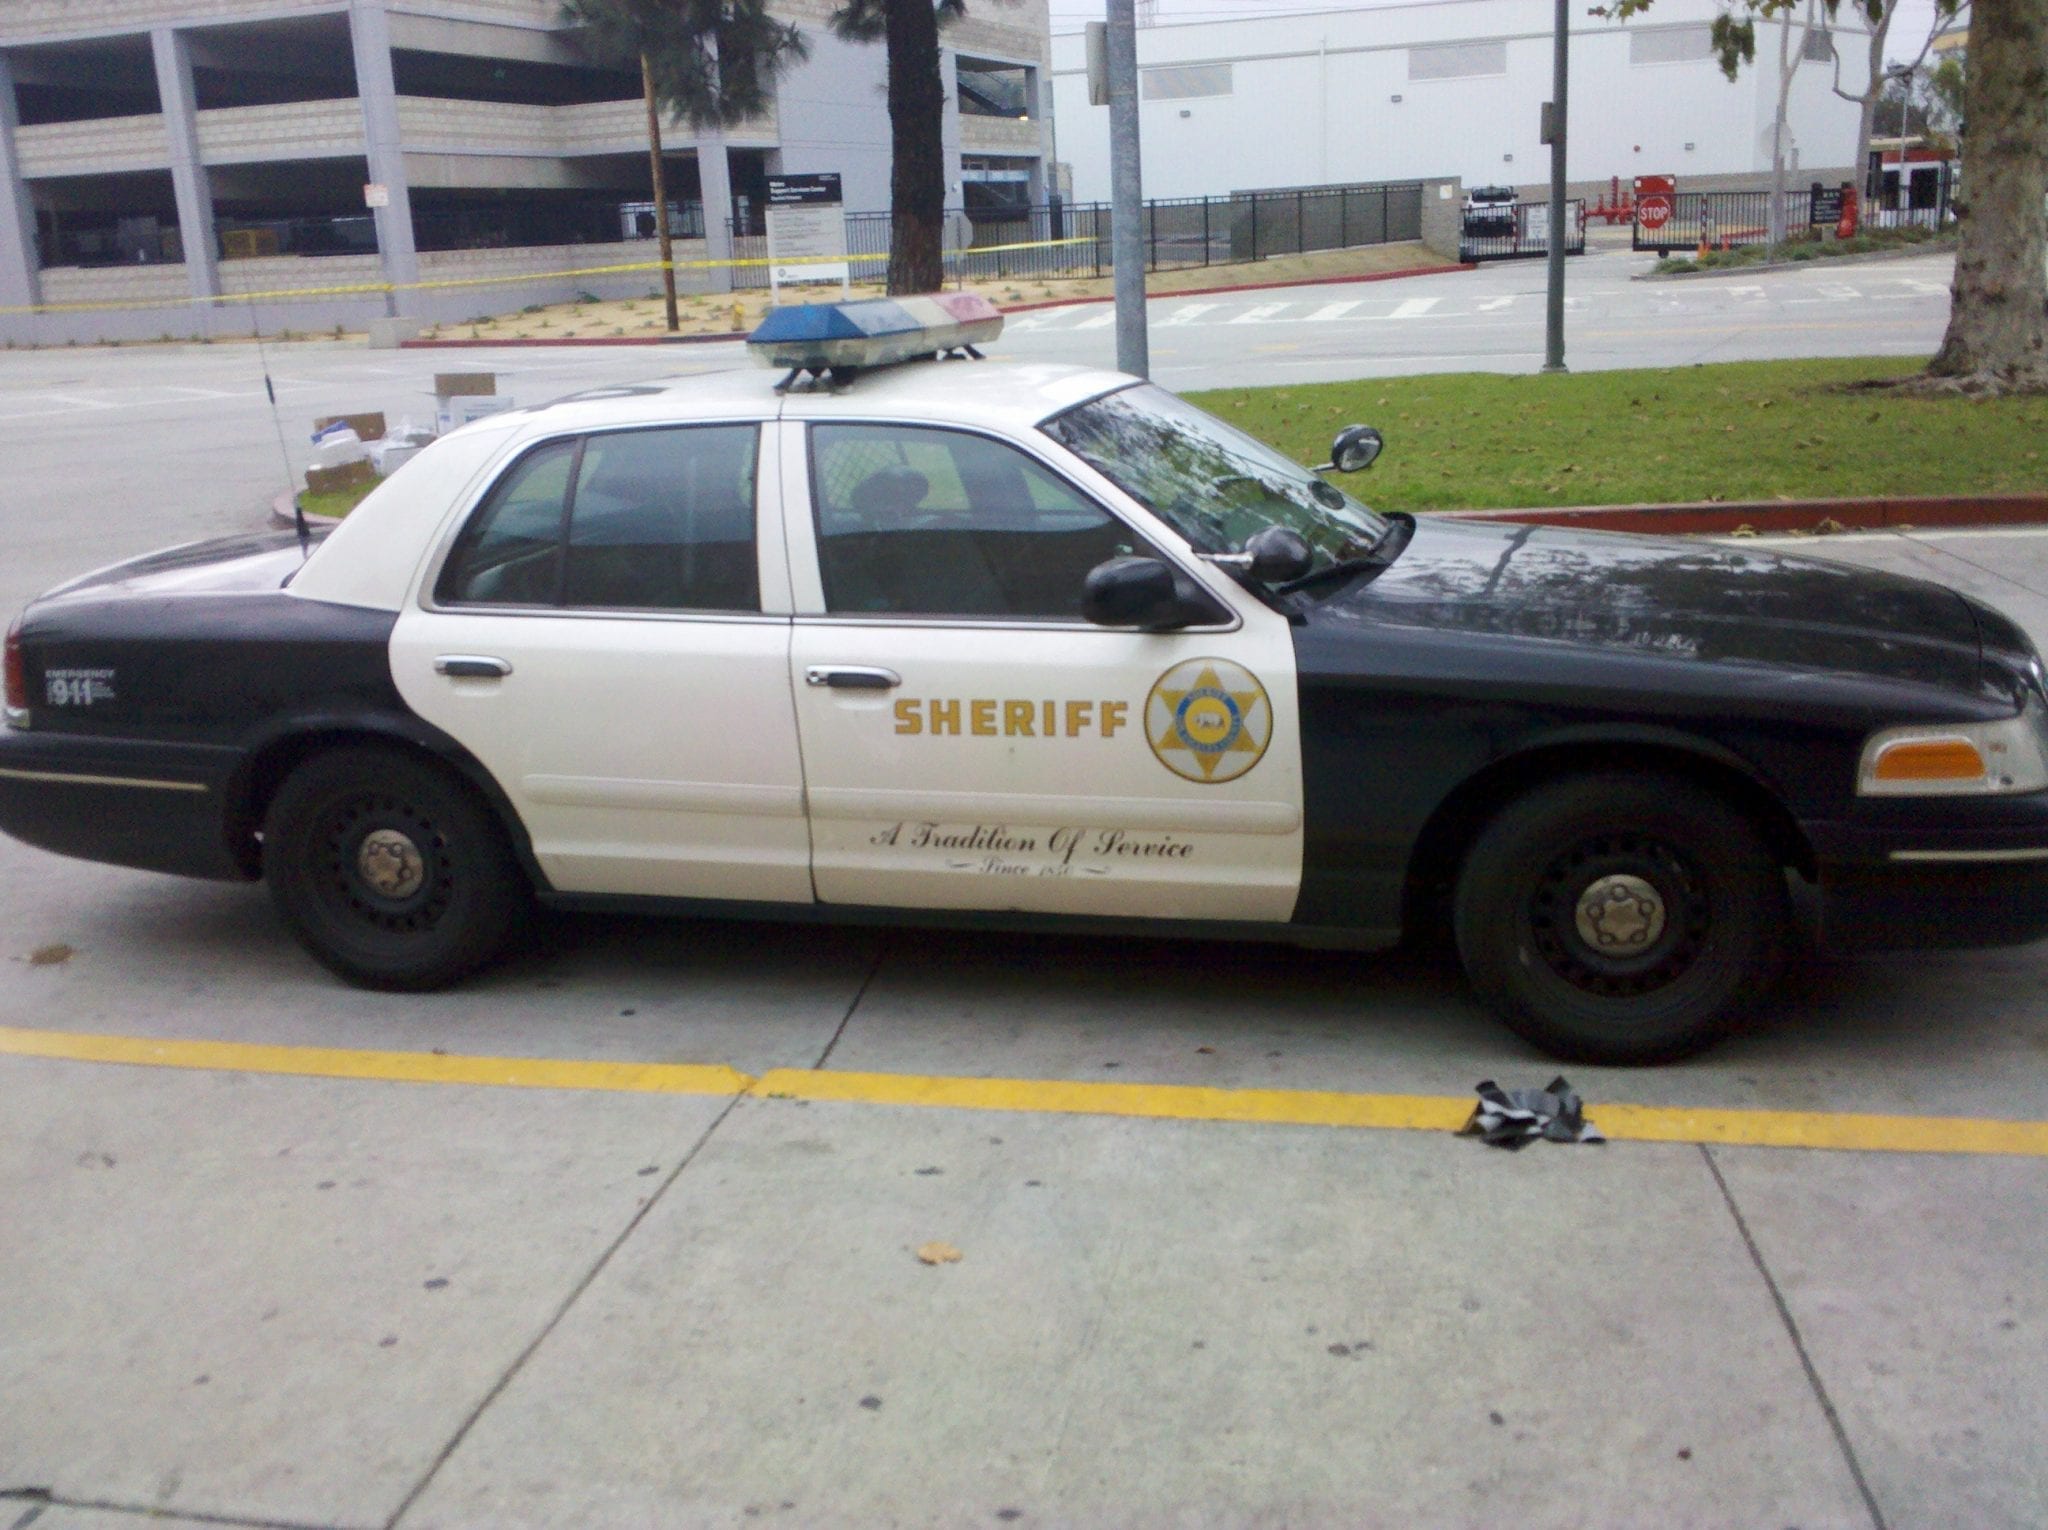 LASD MCJ RADIO CAR; image by UNKNOWN, via Flickr, CC BY-ND 2.0, no changes.